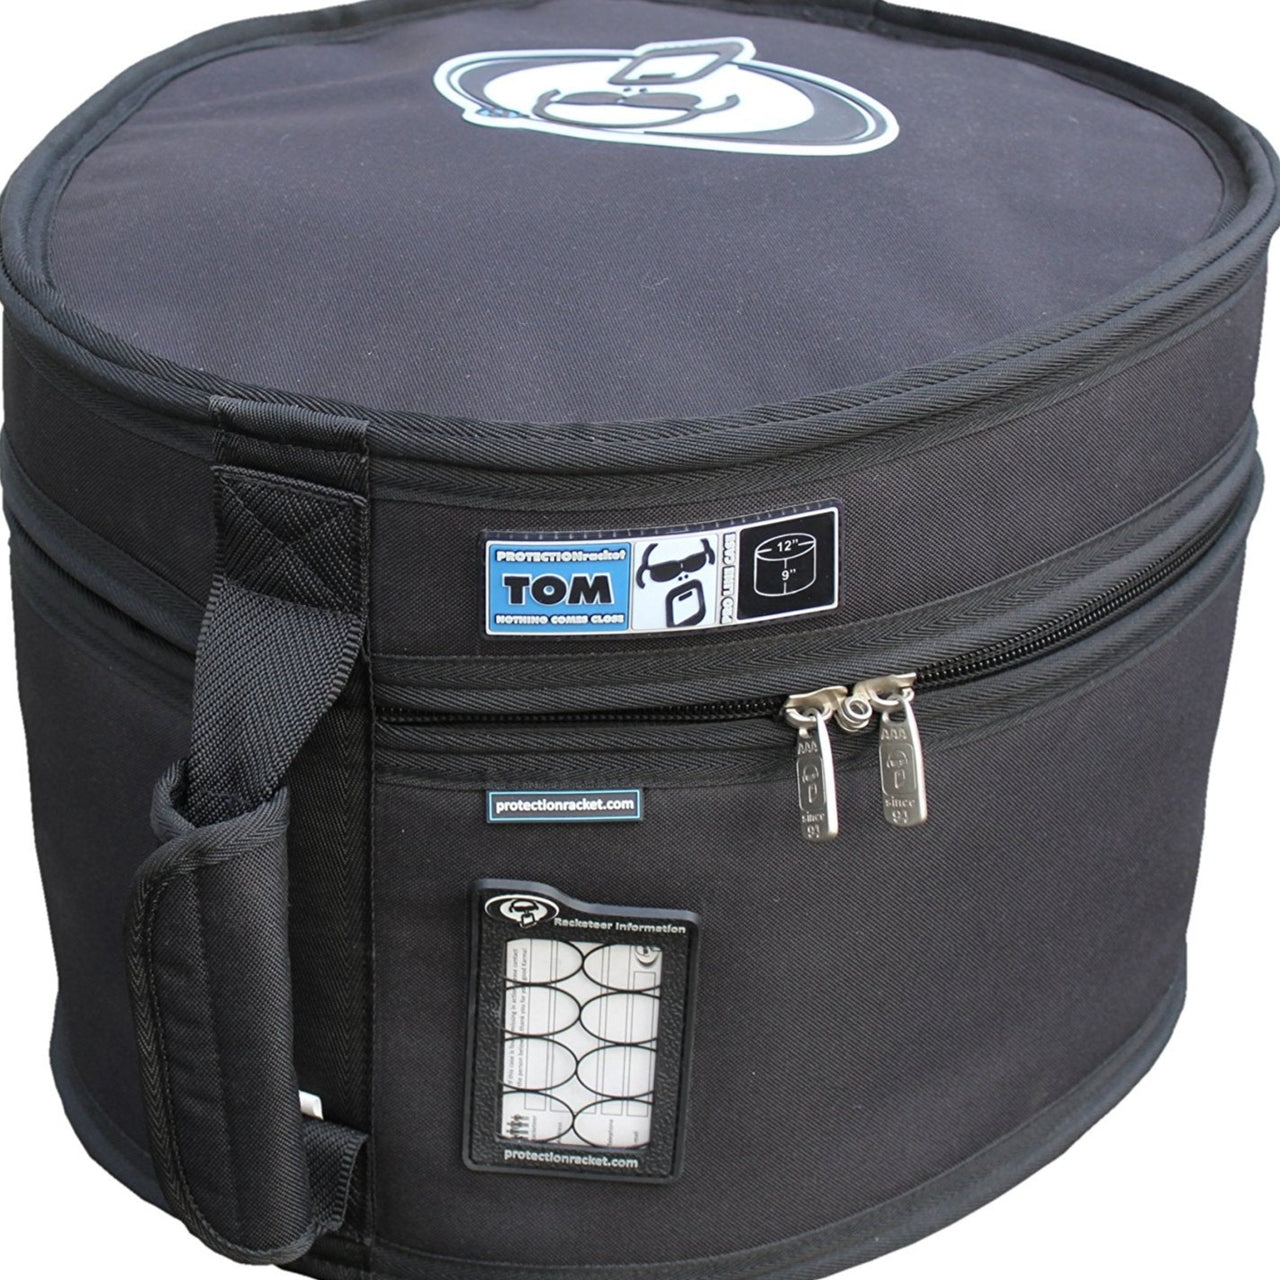 Protection Racket 9 x 13 Egg-shaped Tom Case (5013-10) Cymbal & Drum Cases Protection Racket 